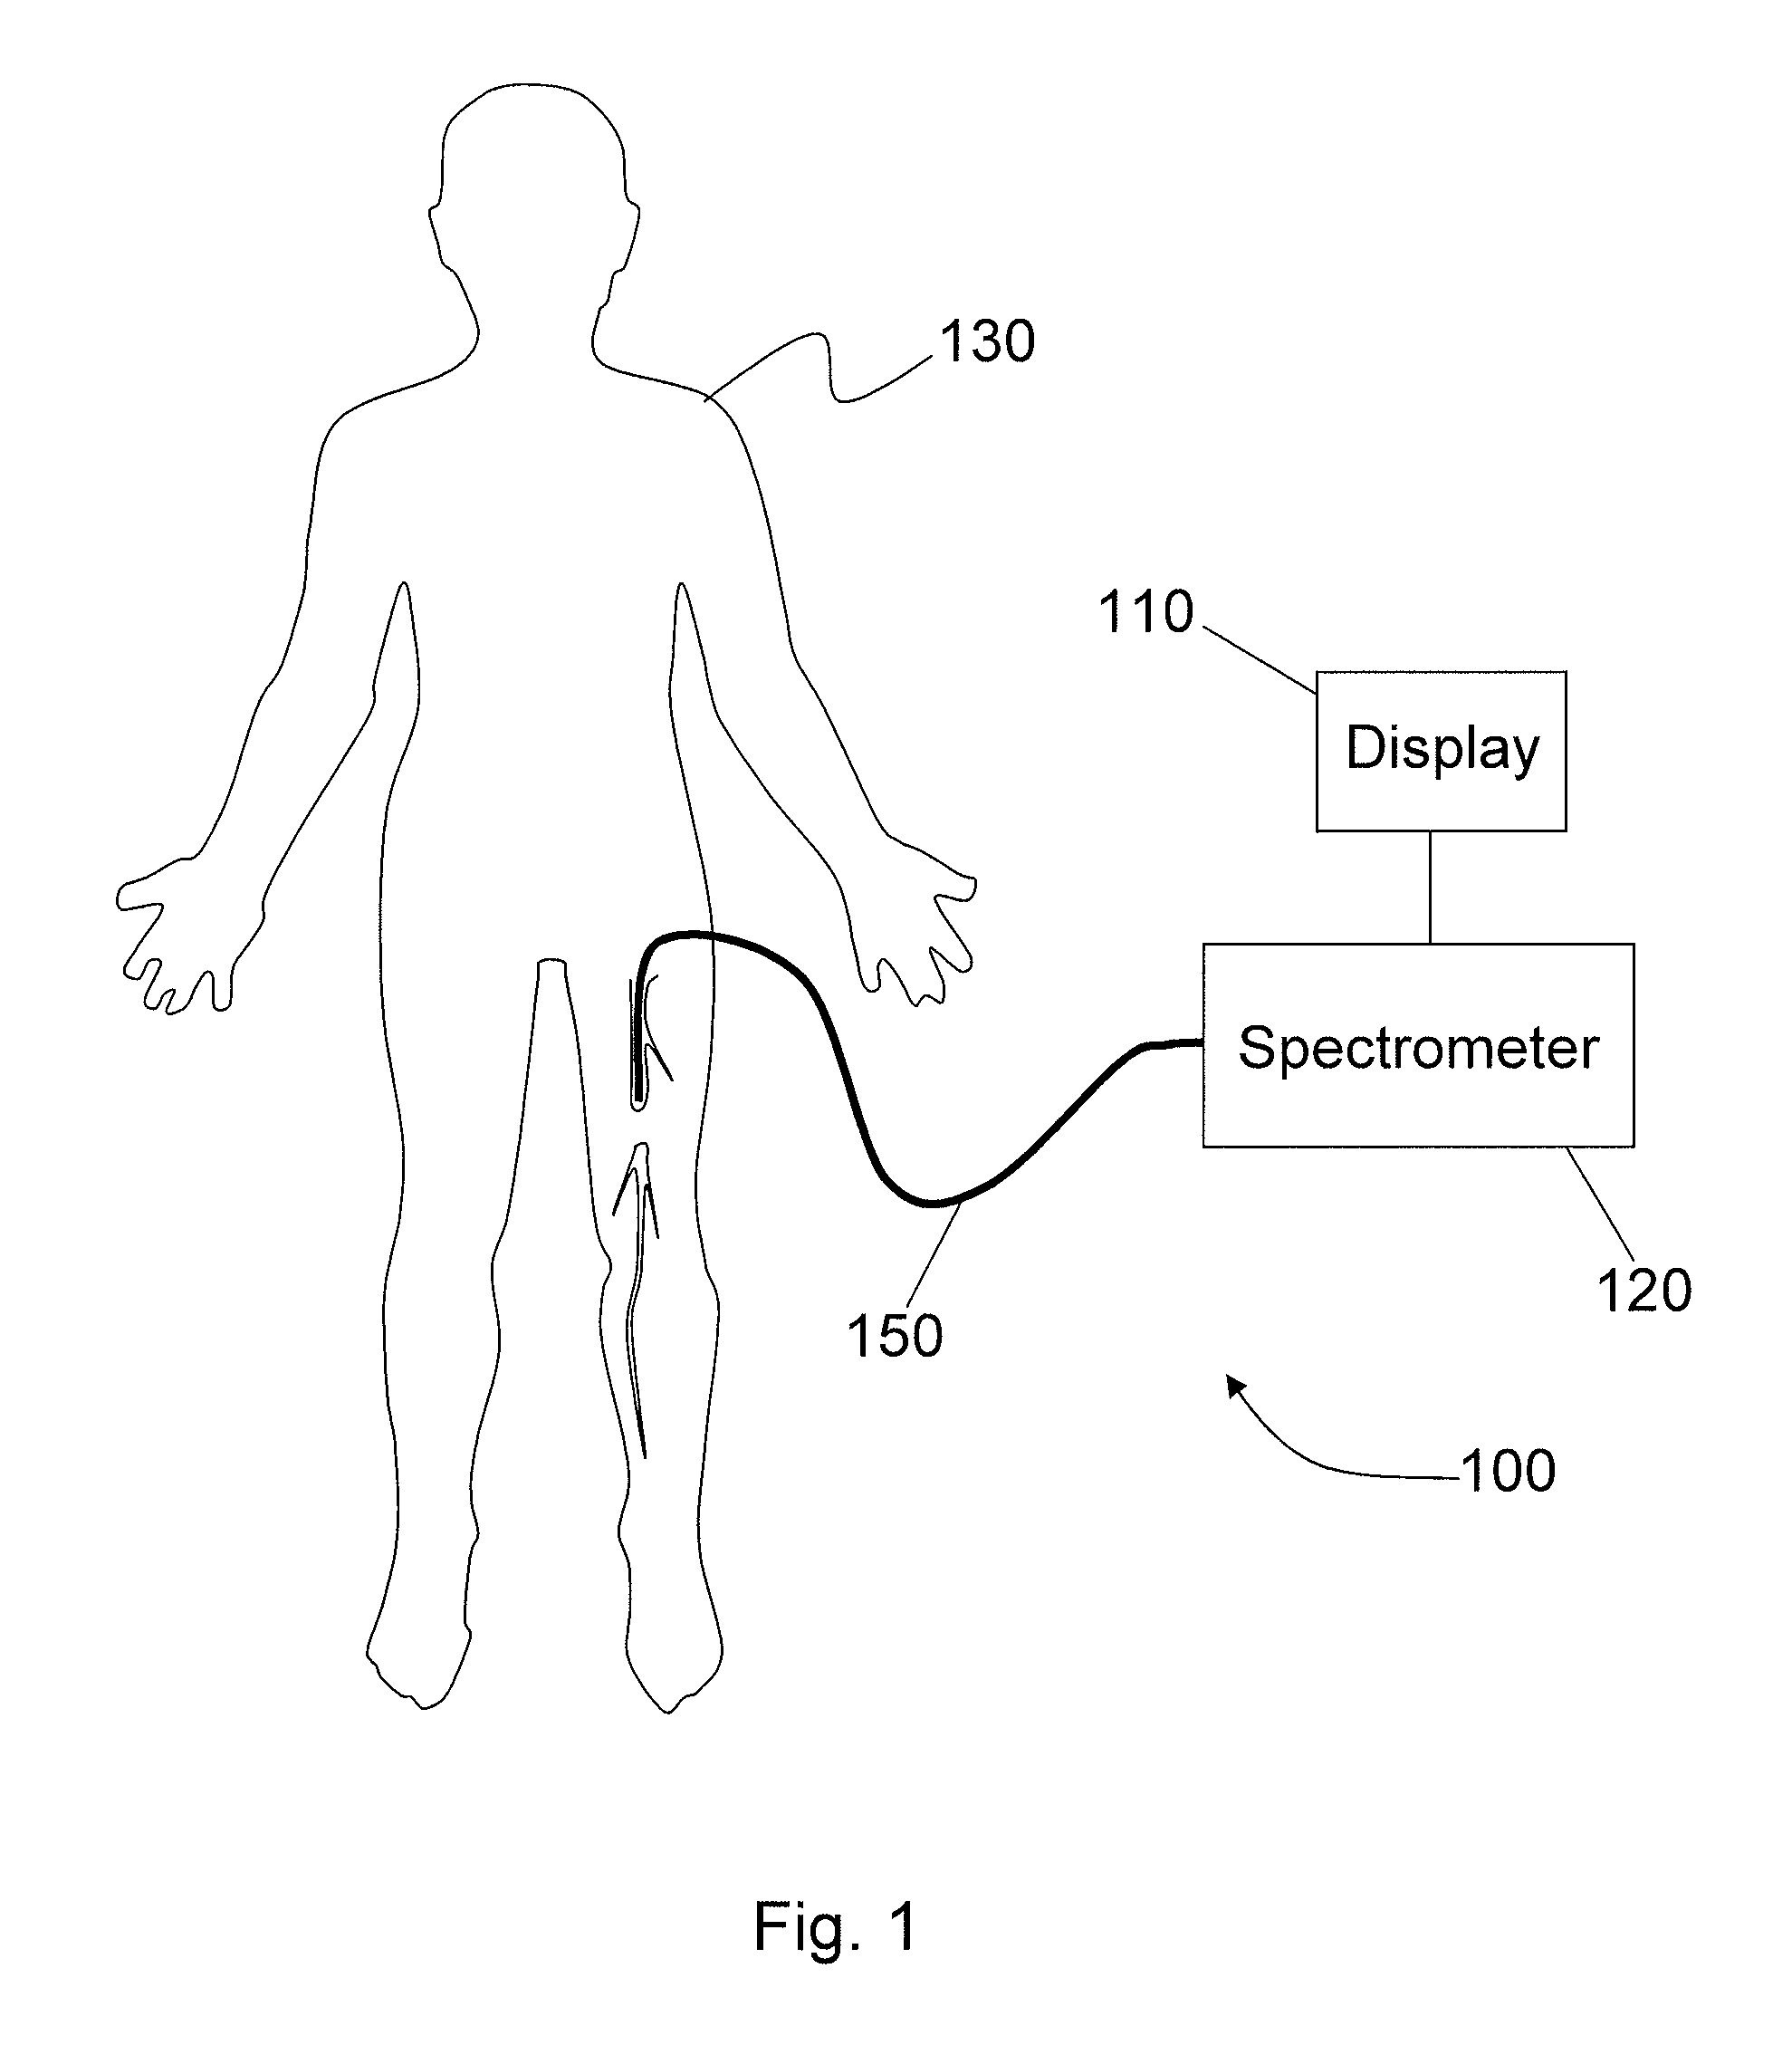 Systems and methods for analysis and treatment of an occluded body lumen